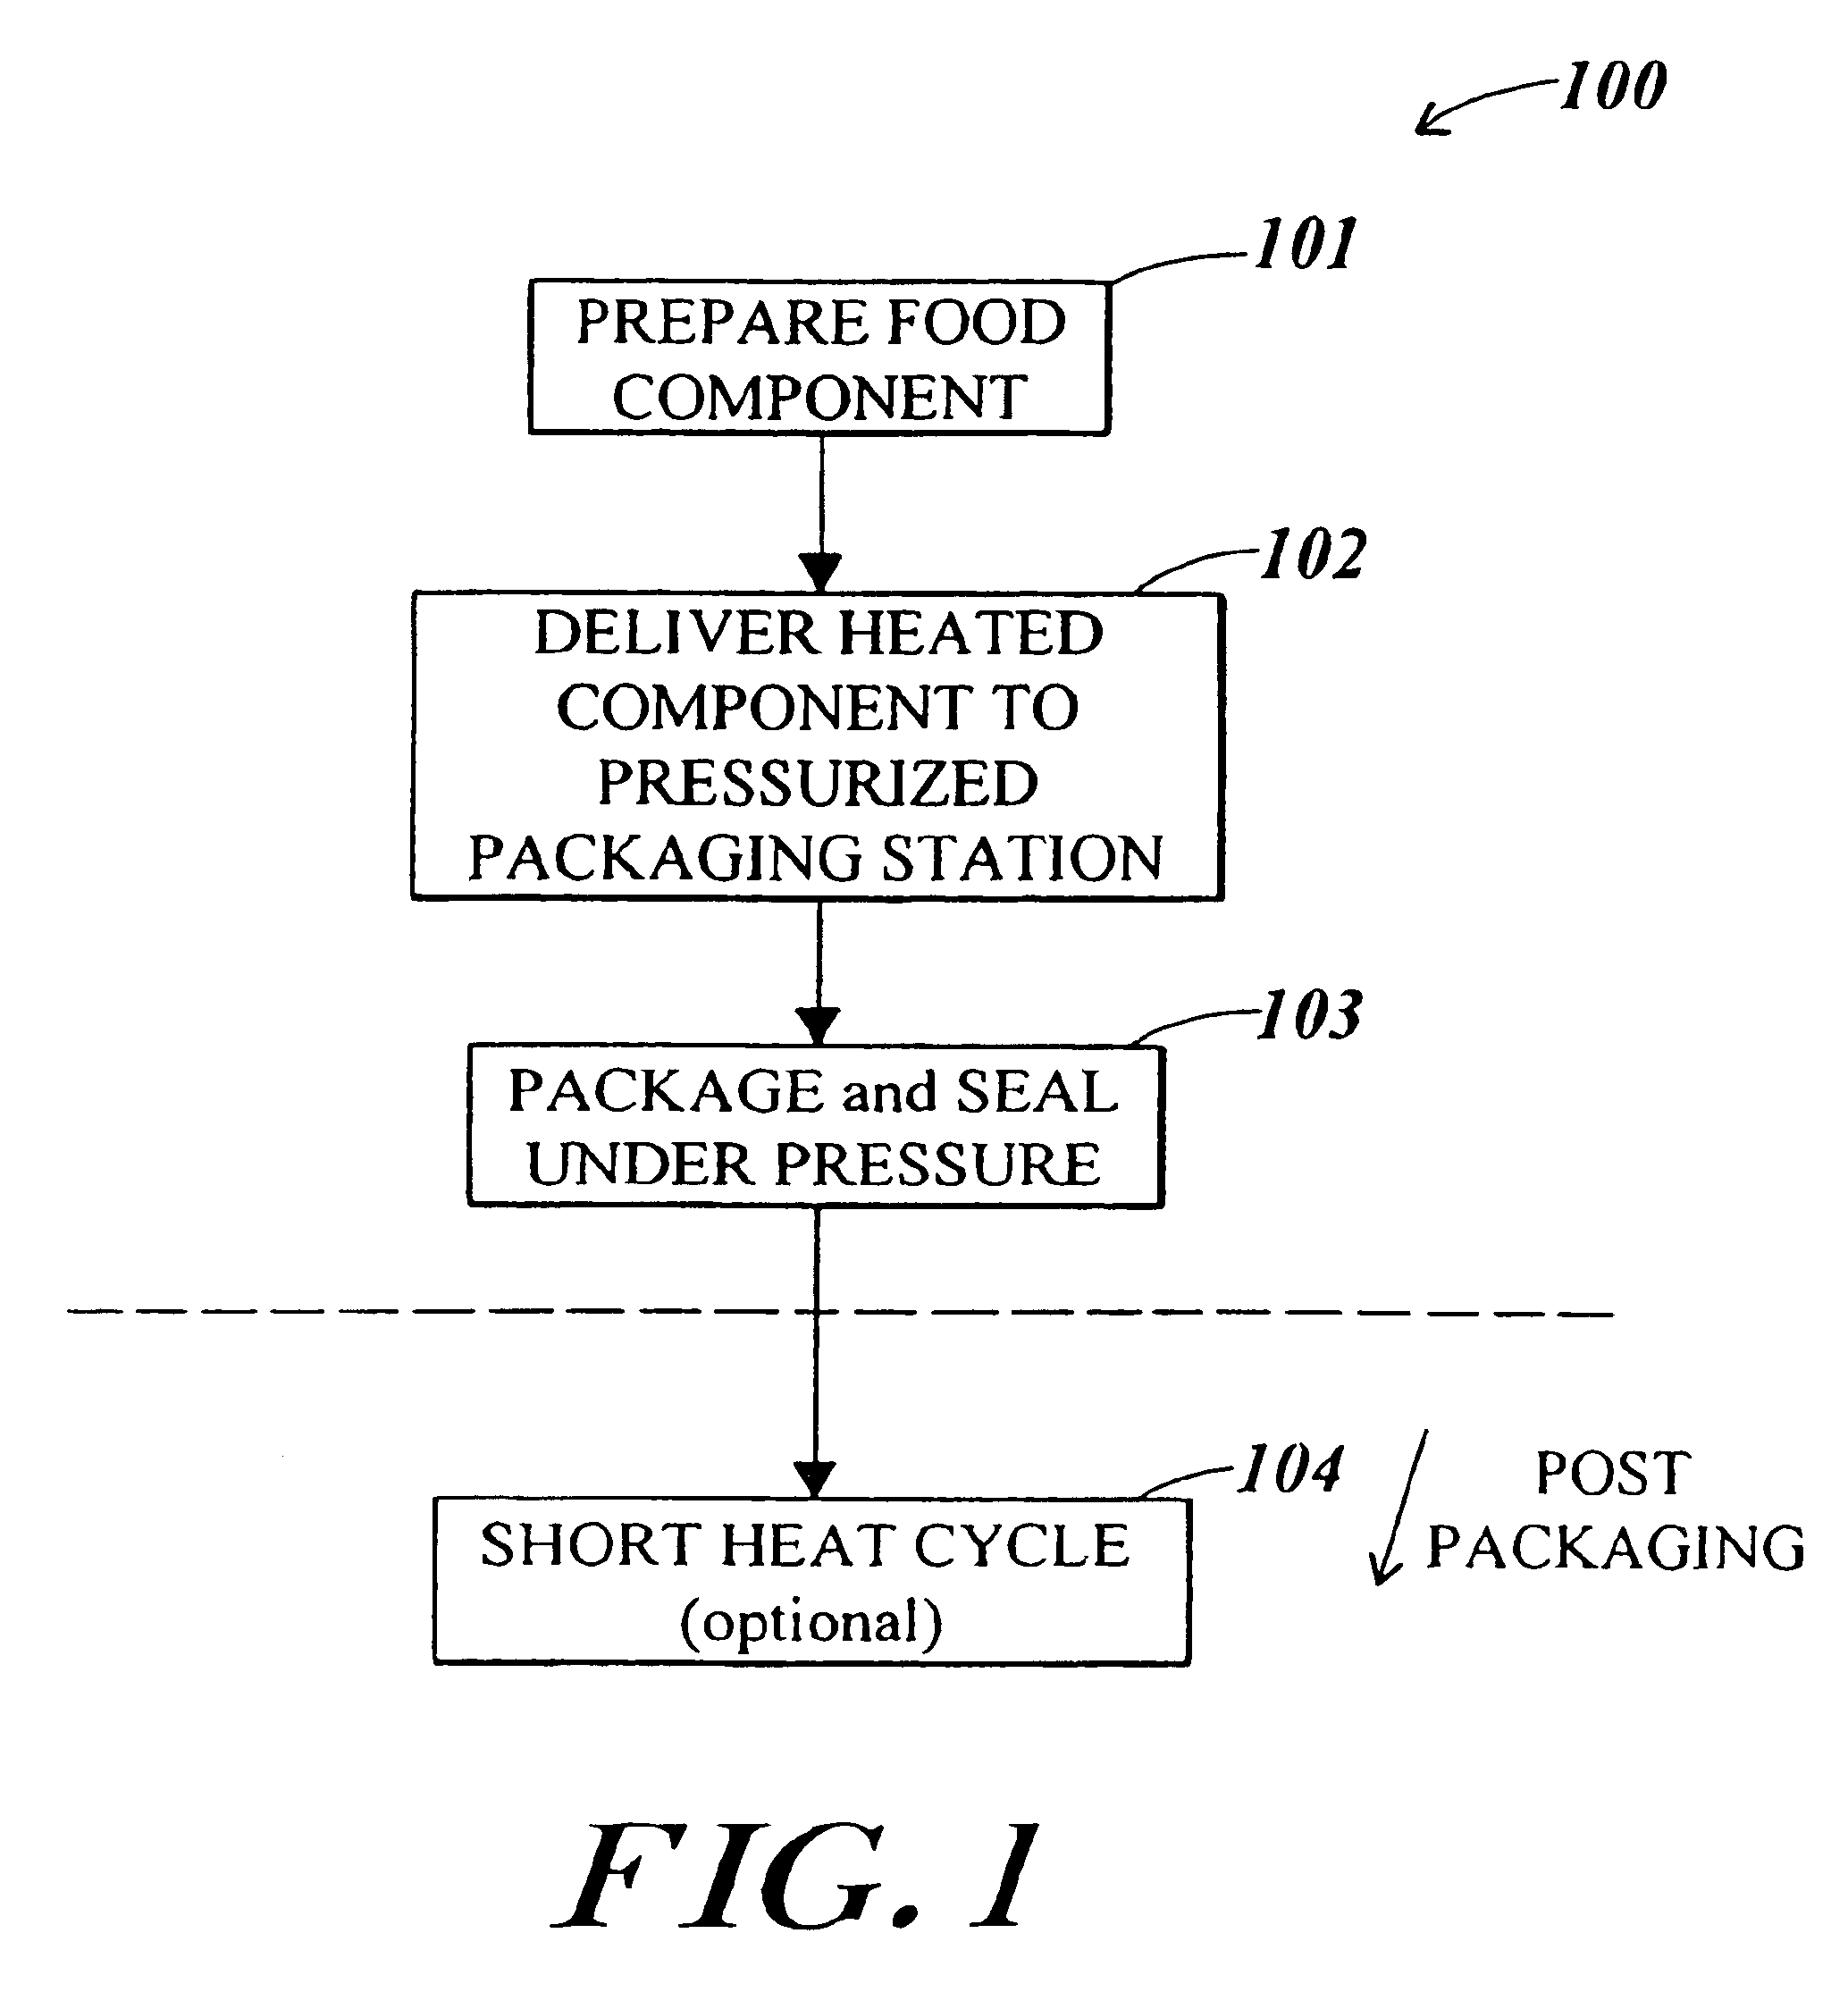 Temperature coordinated through-line food packaging system